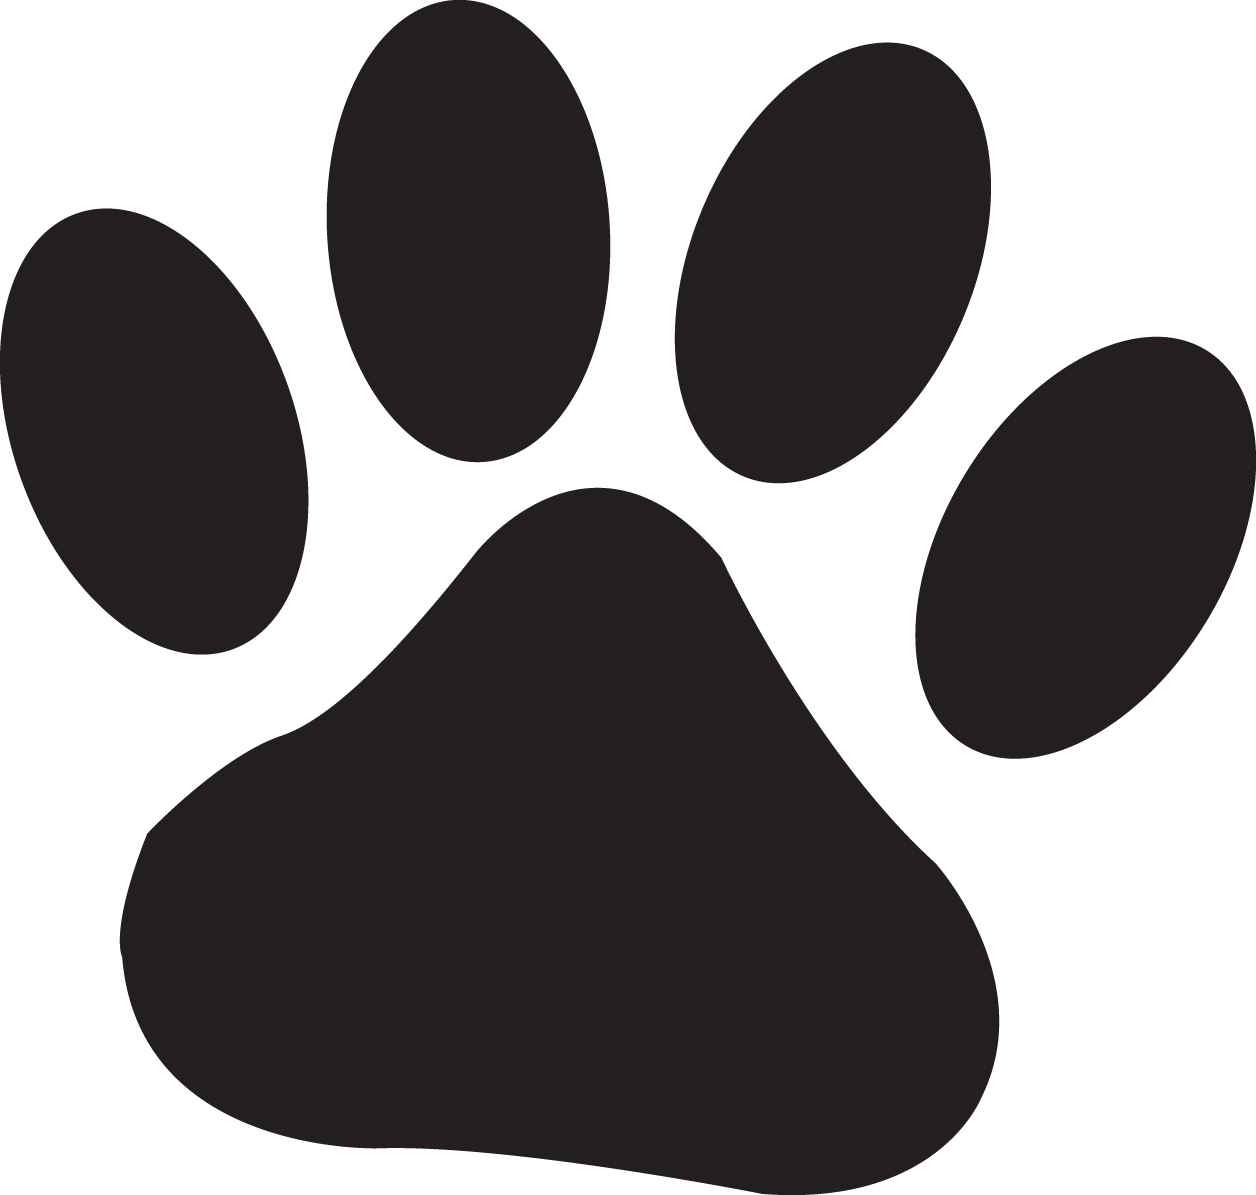 Cat Paw Print Images & Pictures - Becuo - Cliparts.co